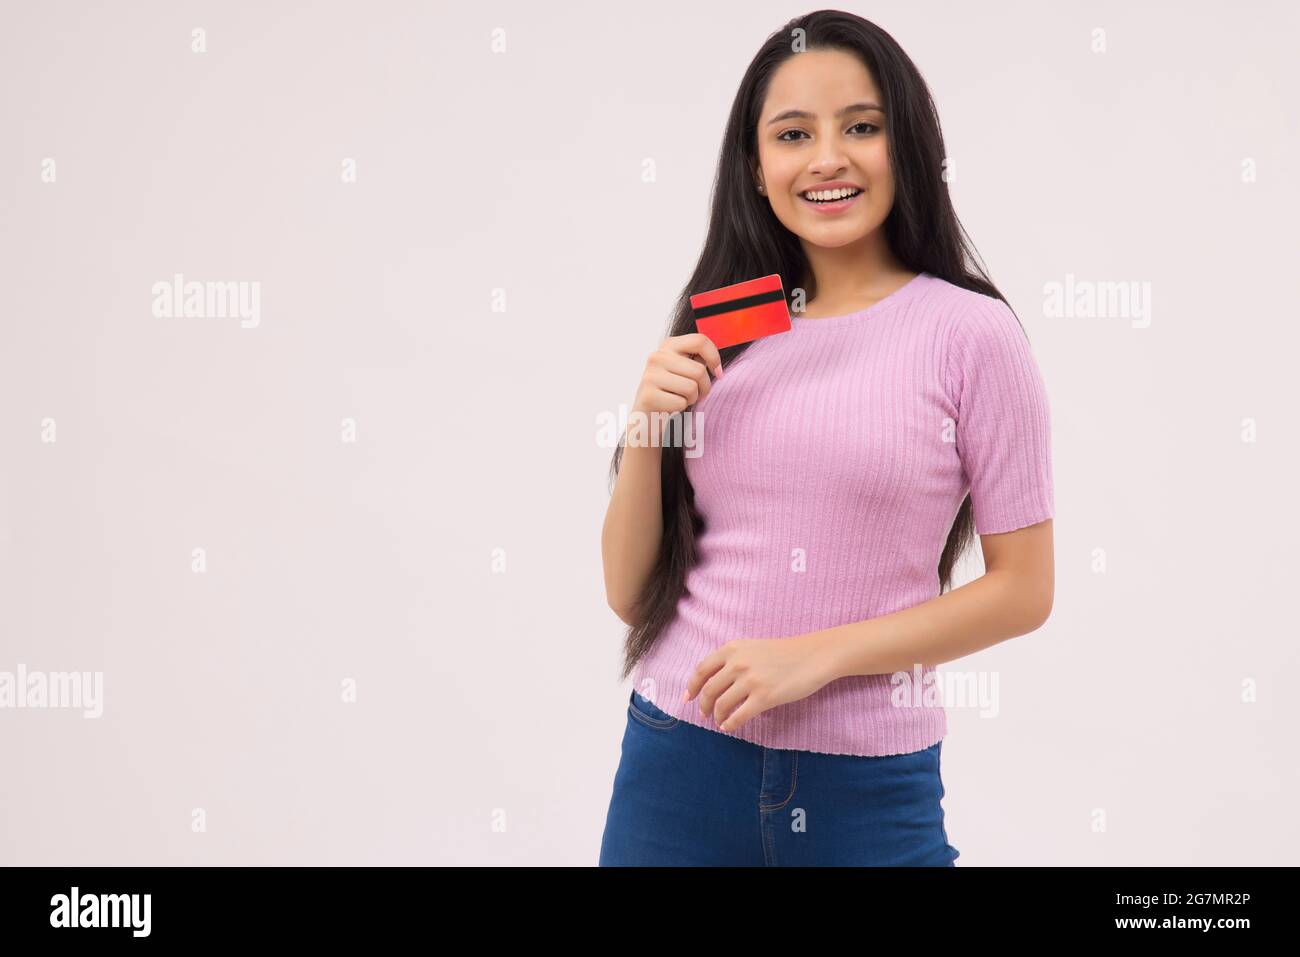 PORTRAIT OF A TEENAGE GIRL HAPPILY HOLDING DEBIT CARD Stock Photo